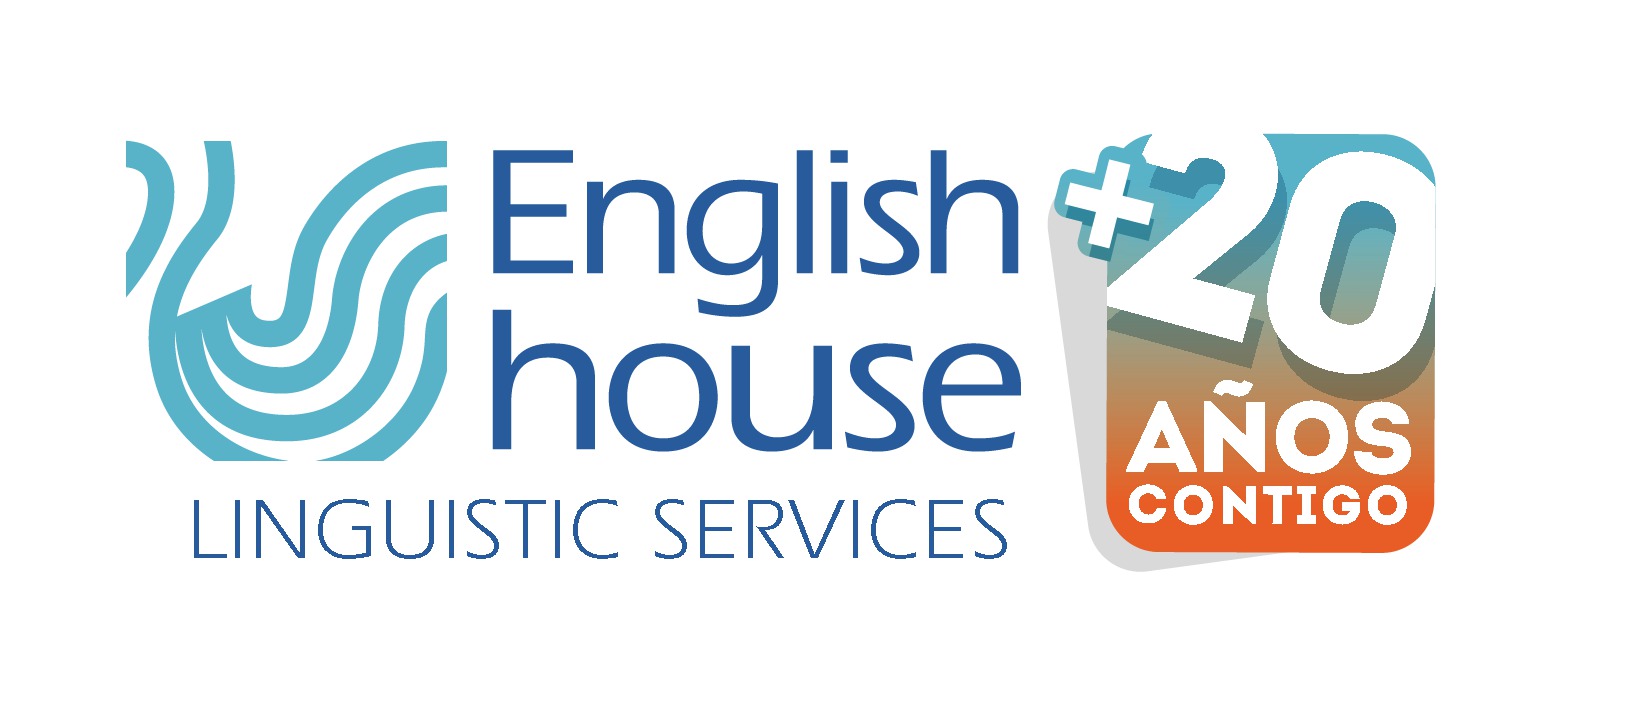 ACTIVE GLOBAL ENGLISH HOUSE LINGUISTIC SERVICES